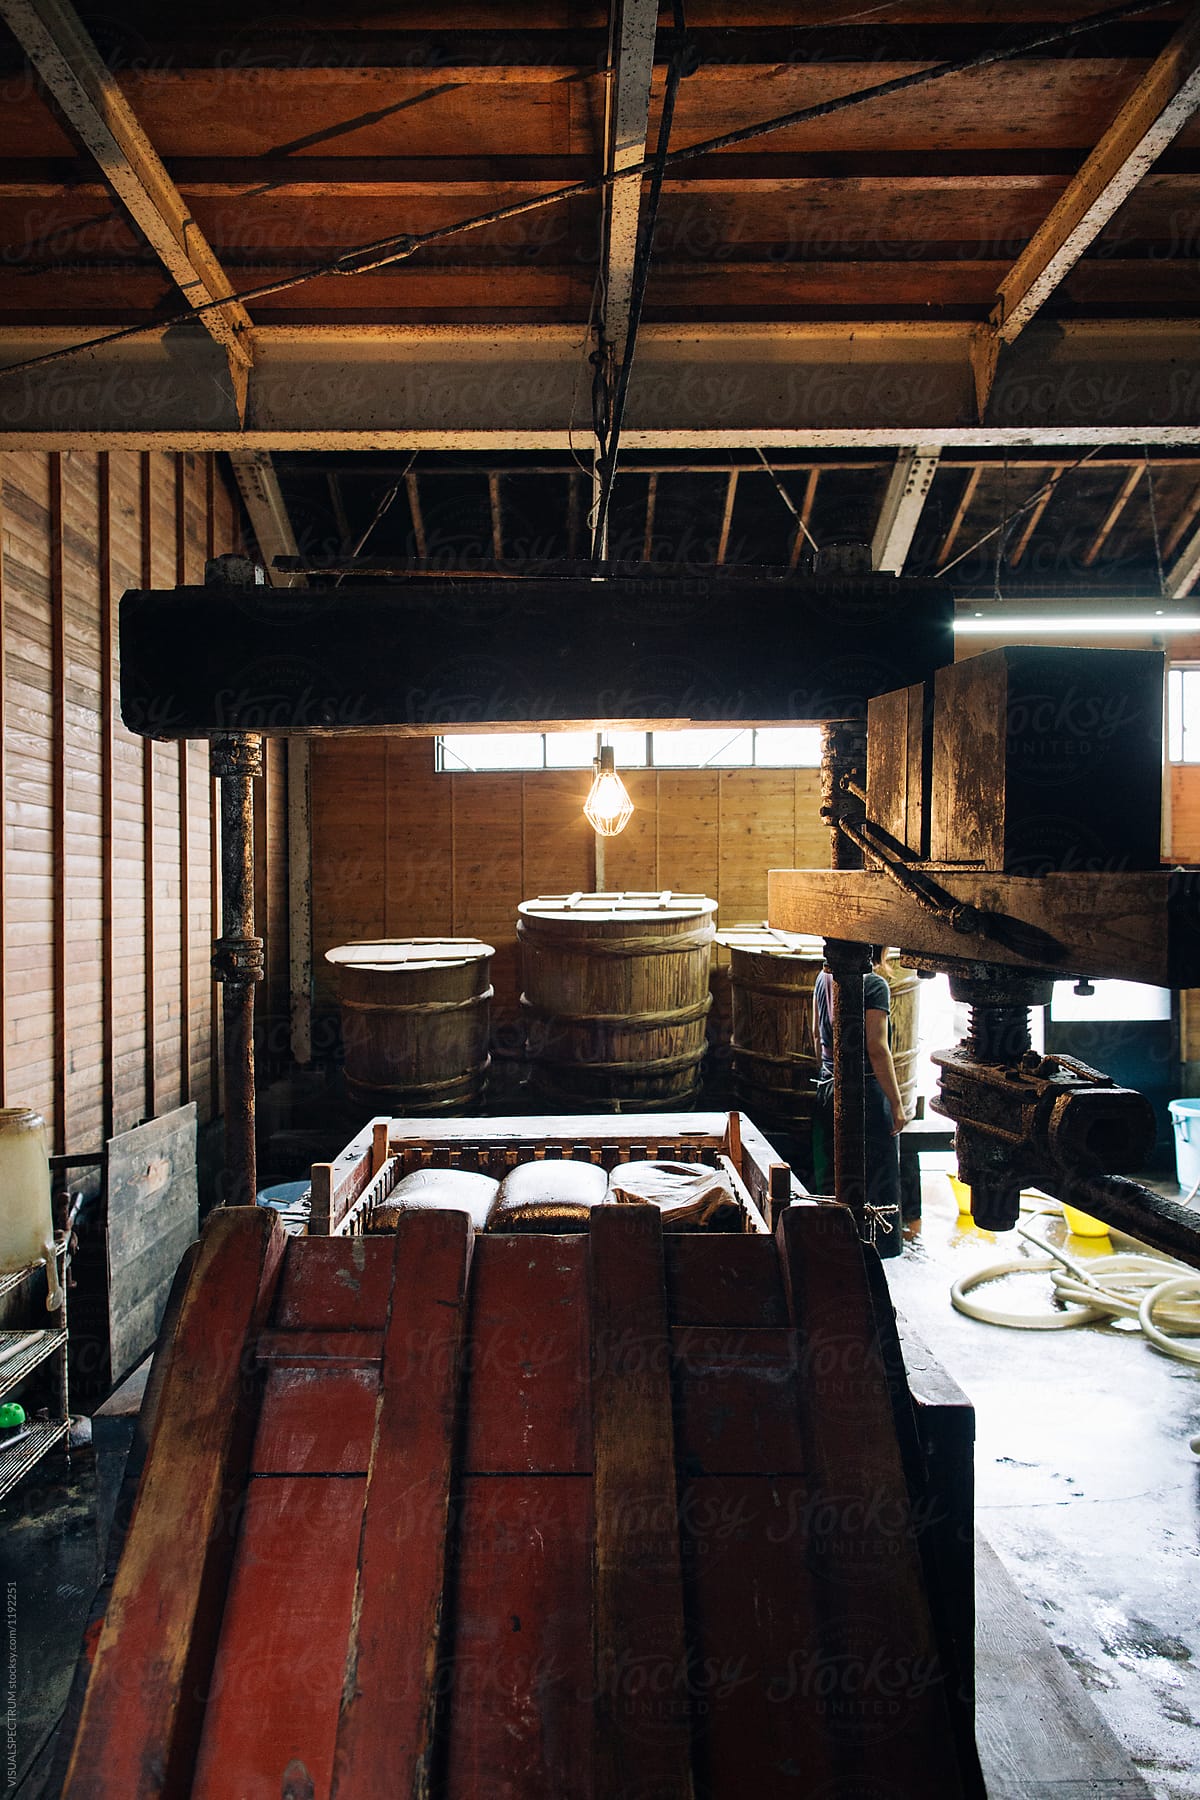 Traditional Soy Sauce Making - Wooden Press With Barrels in Background